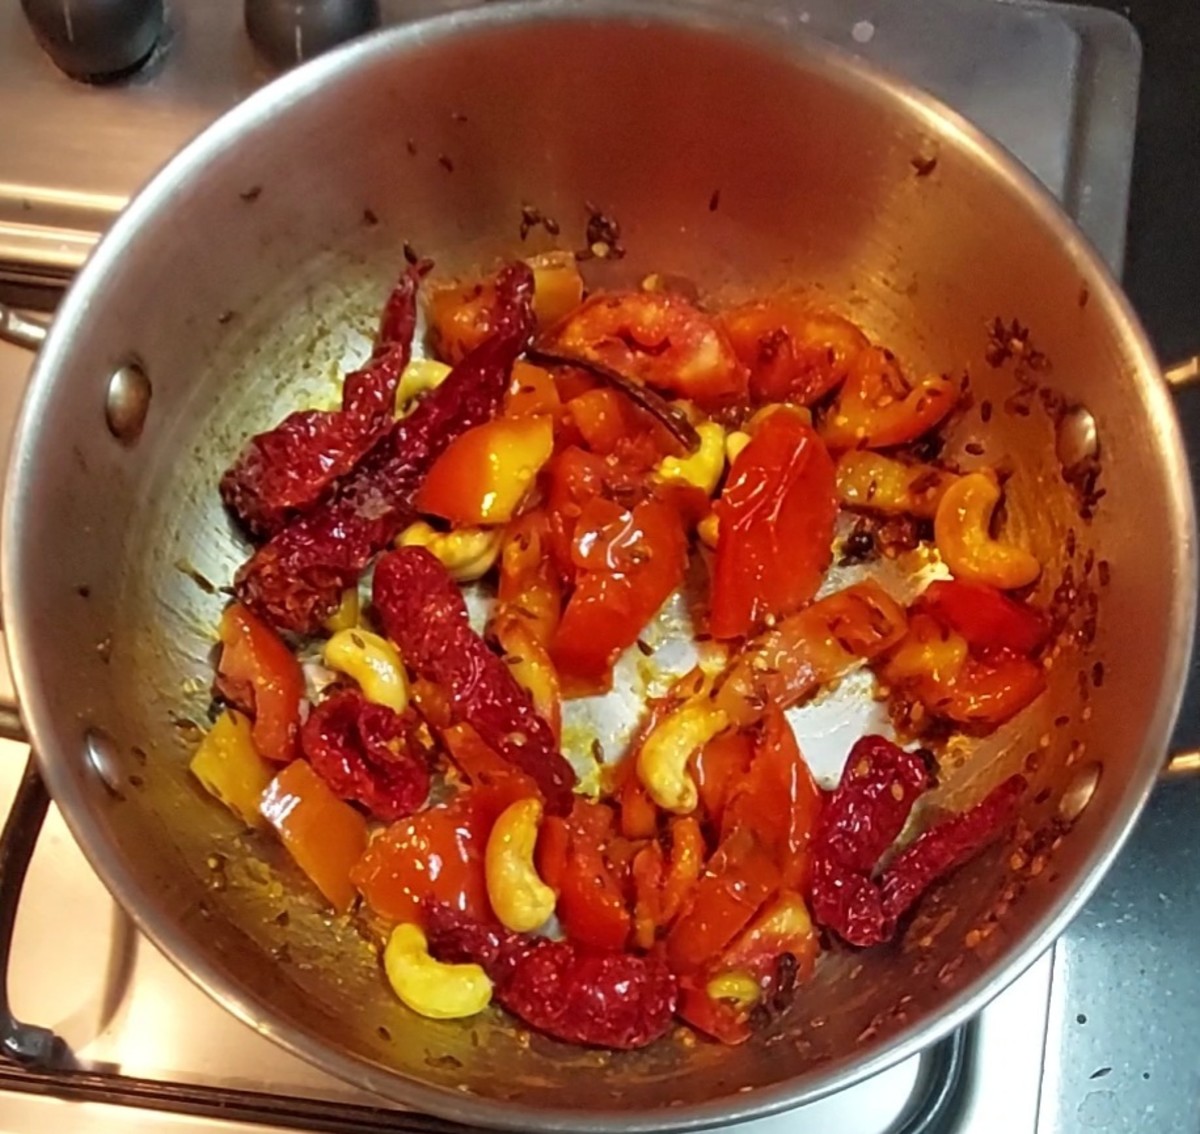 Fry for a minute, close the lid and cook over low flame till tomato shrinks and is well cooked. Add salt, mix well and switch off the flame. Let the mixture cool down completely.